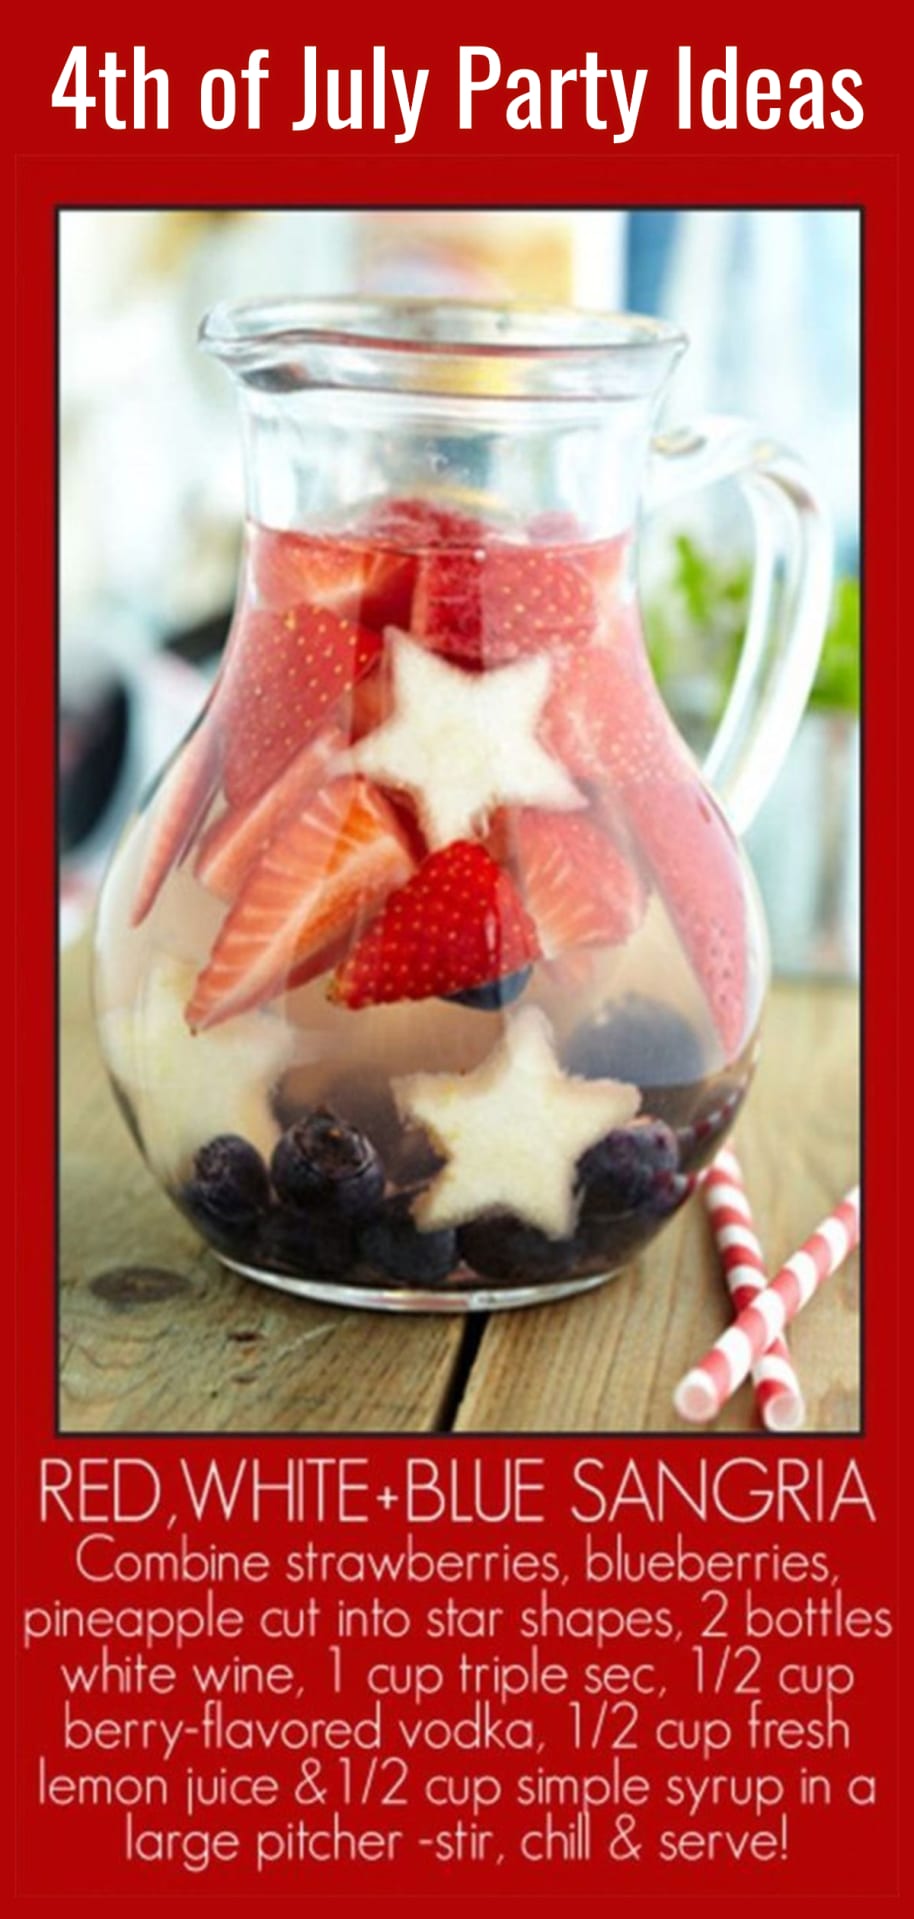 4th of July party ideas - fun drink ideas for the grownups at your 4th of July potluck, picnic. party, cookout or neighborhood block party